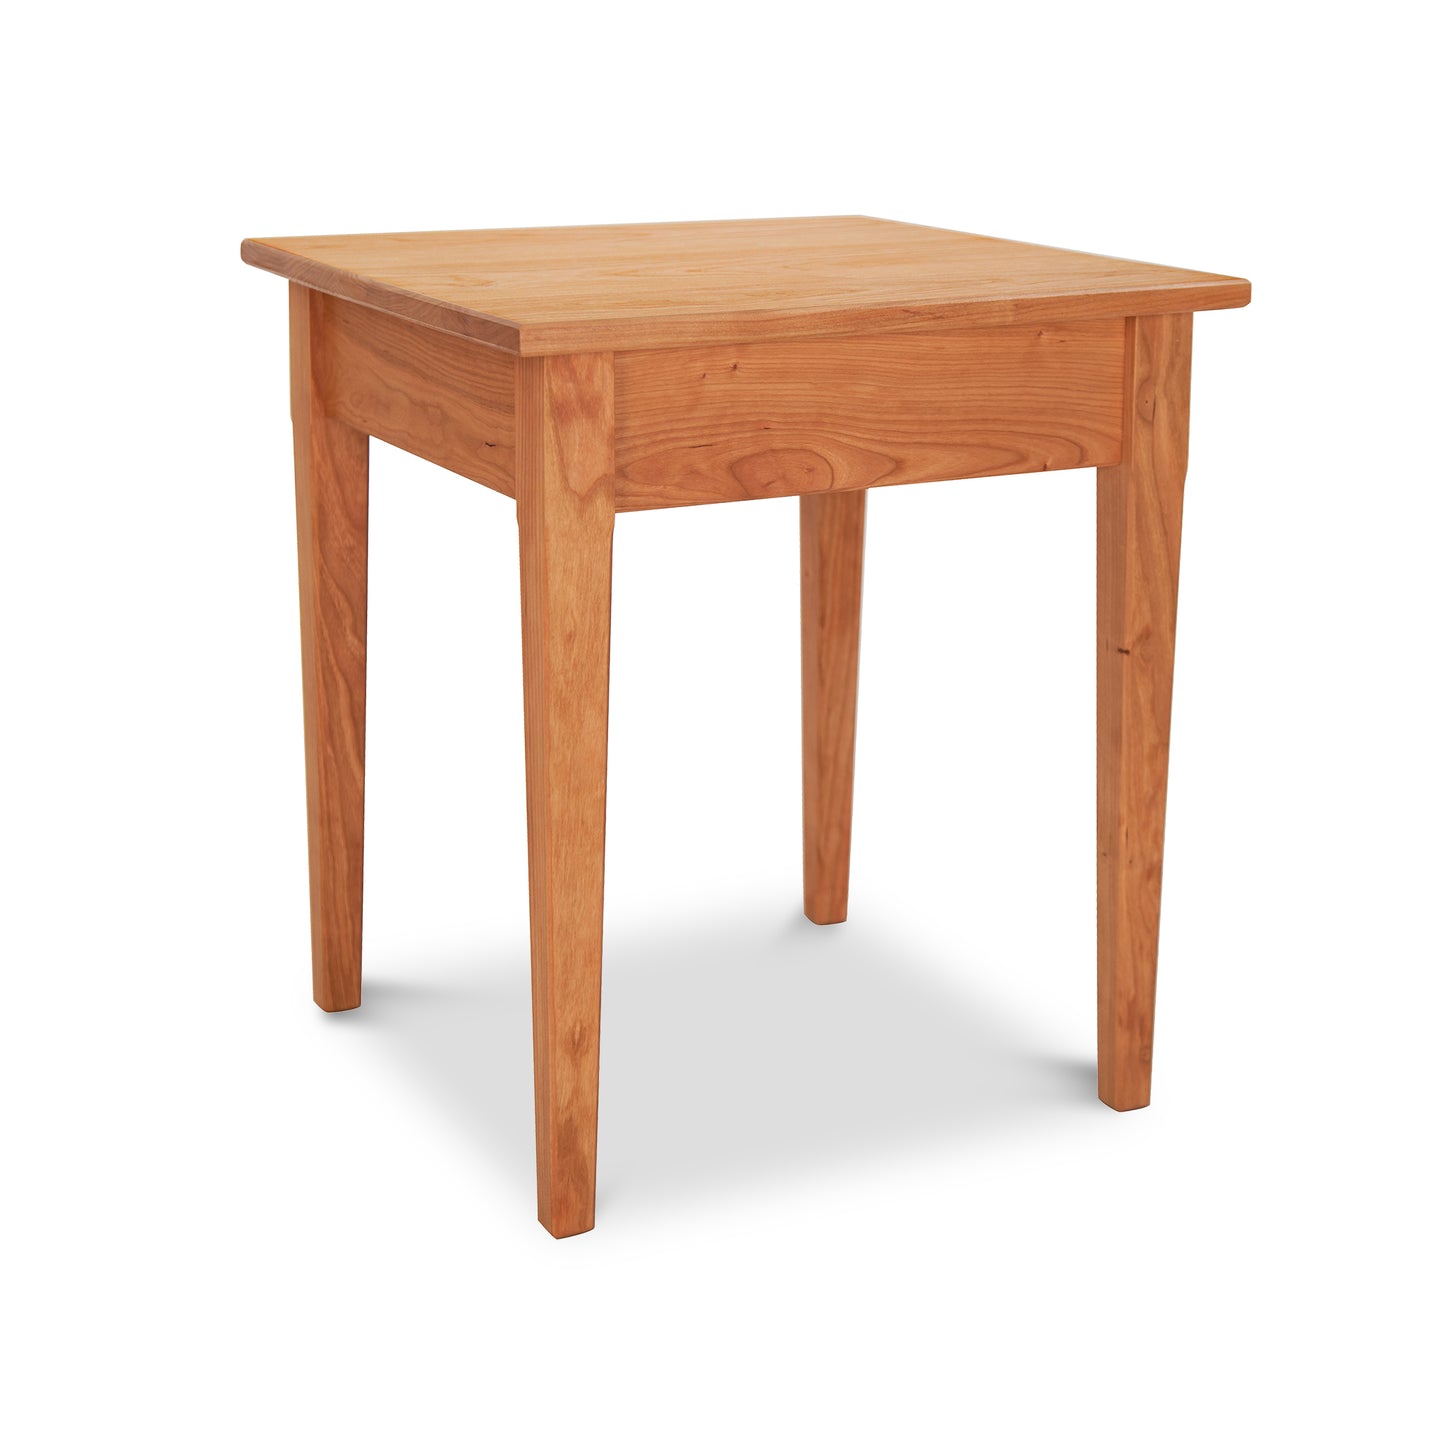 A Vermont Shaker End Table crafted from sustainably harvested hardwoods by Maple Corner Woodworks, with a smooth surface and four legs, isolated on a white background.